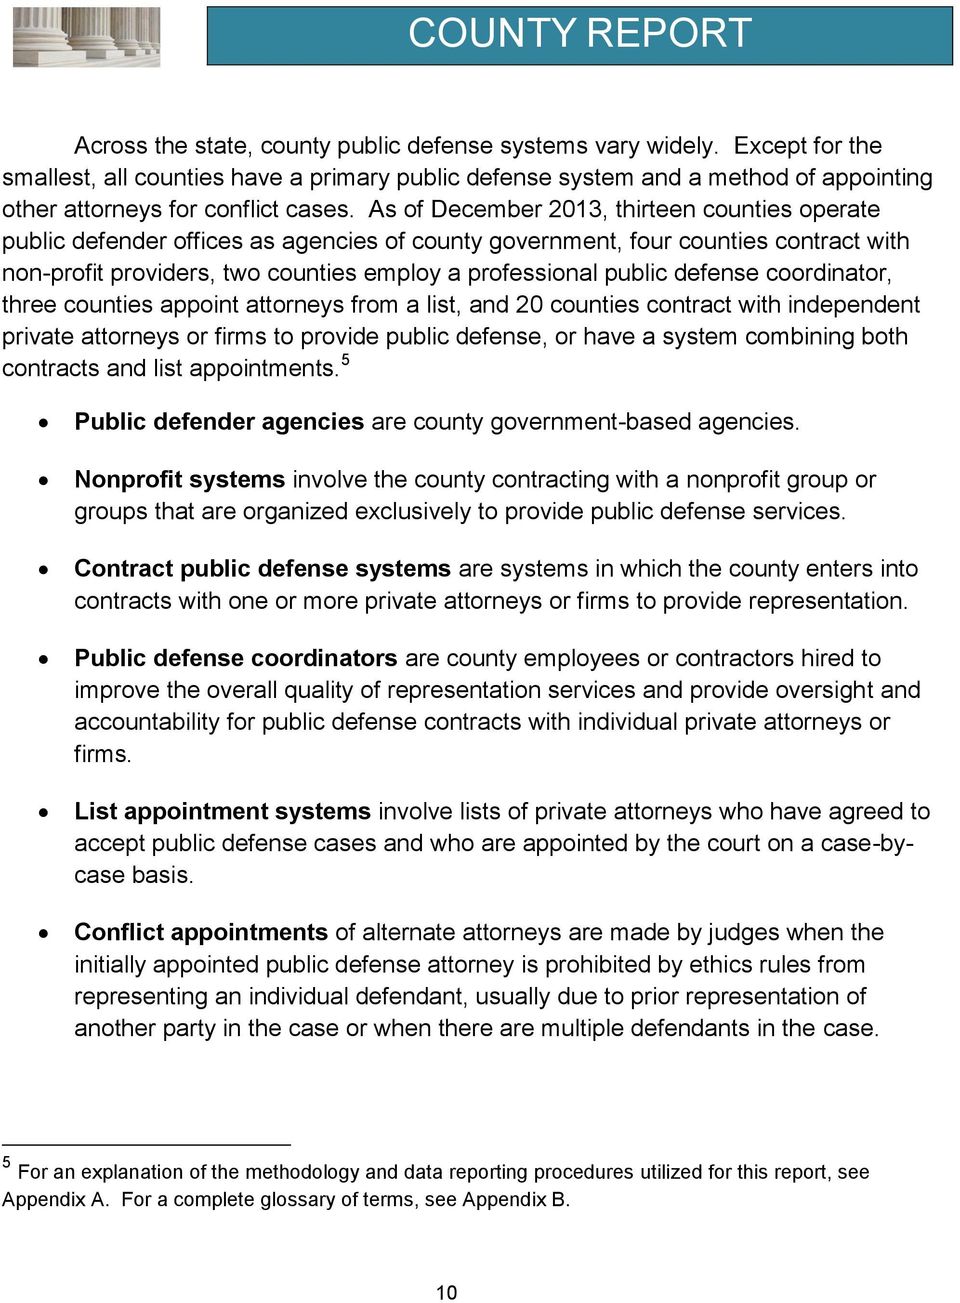 As of December 2013, thirteen counties operate public defender offices as agencies of county government, four counties contract with non-profit providers, two counties employ a professional public